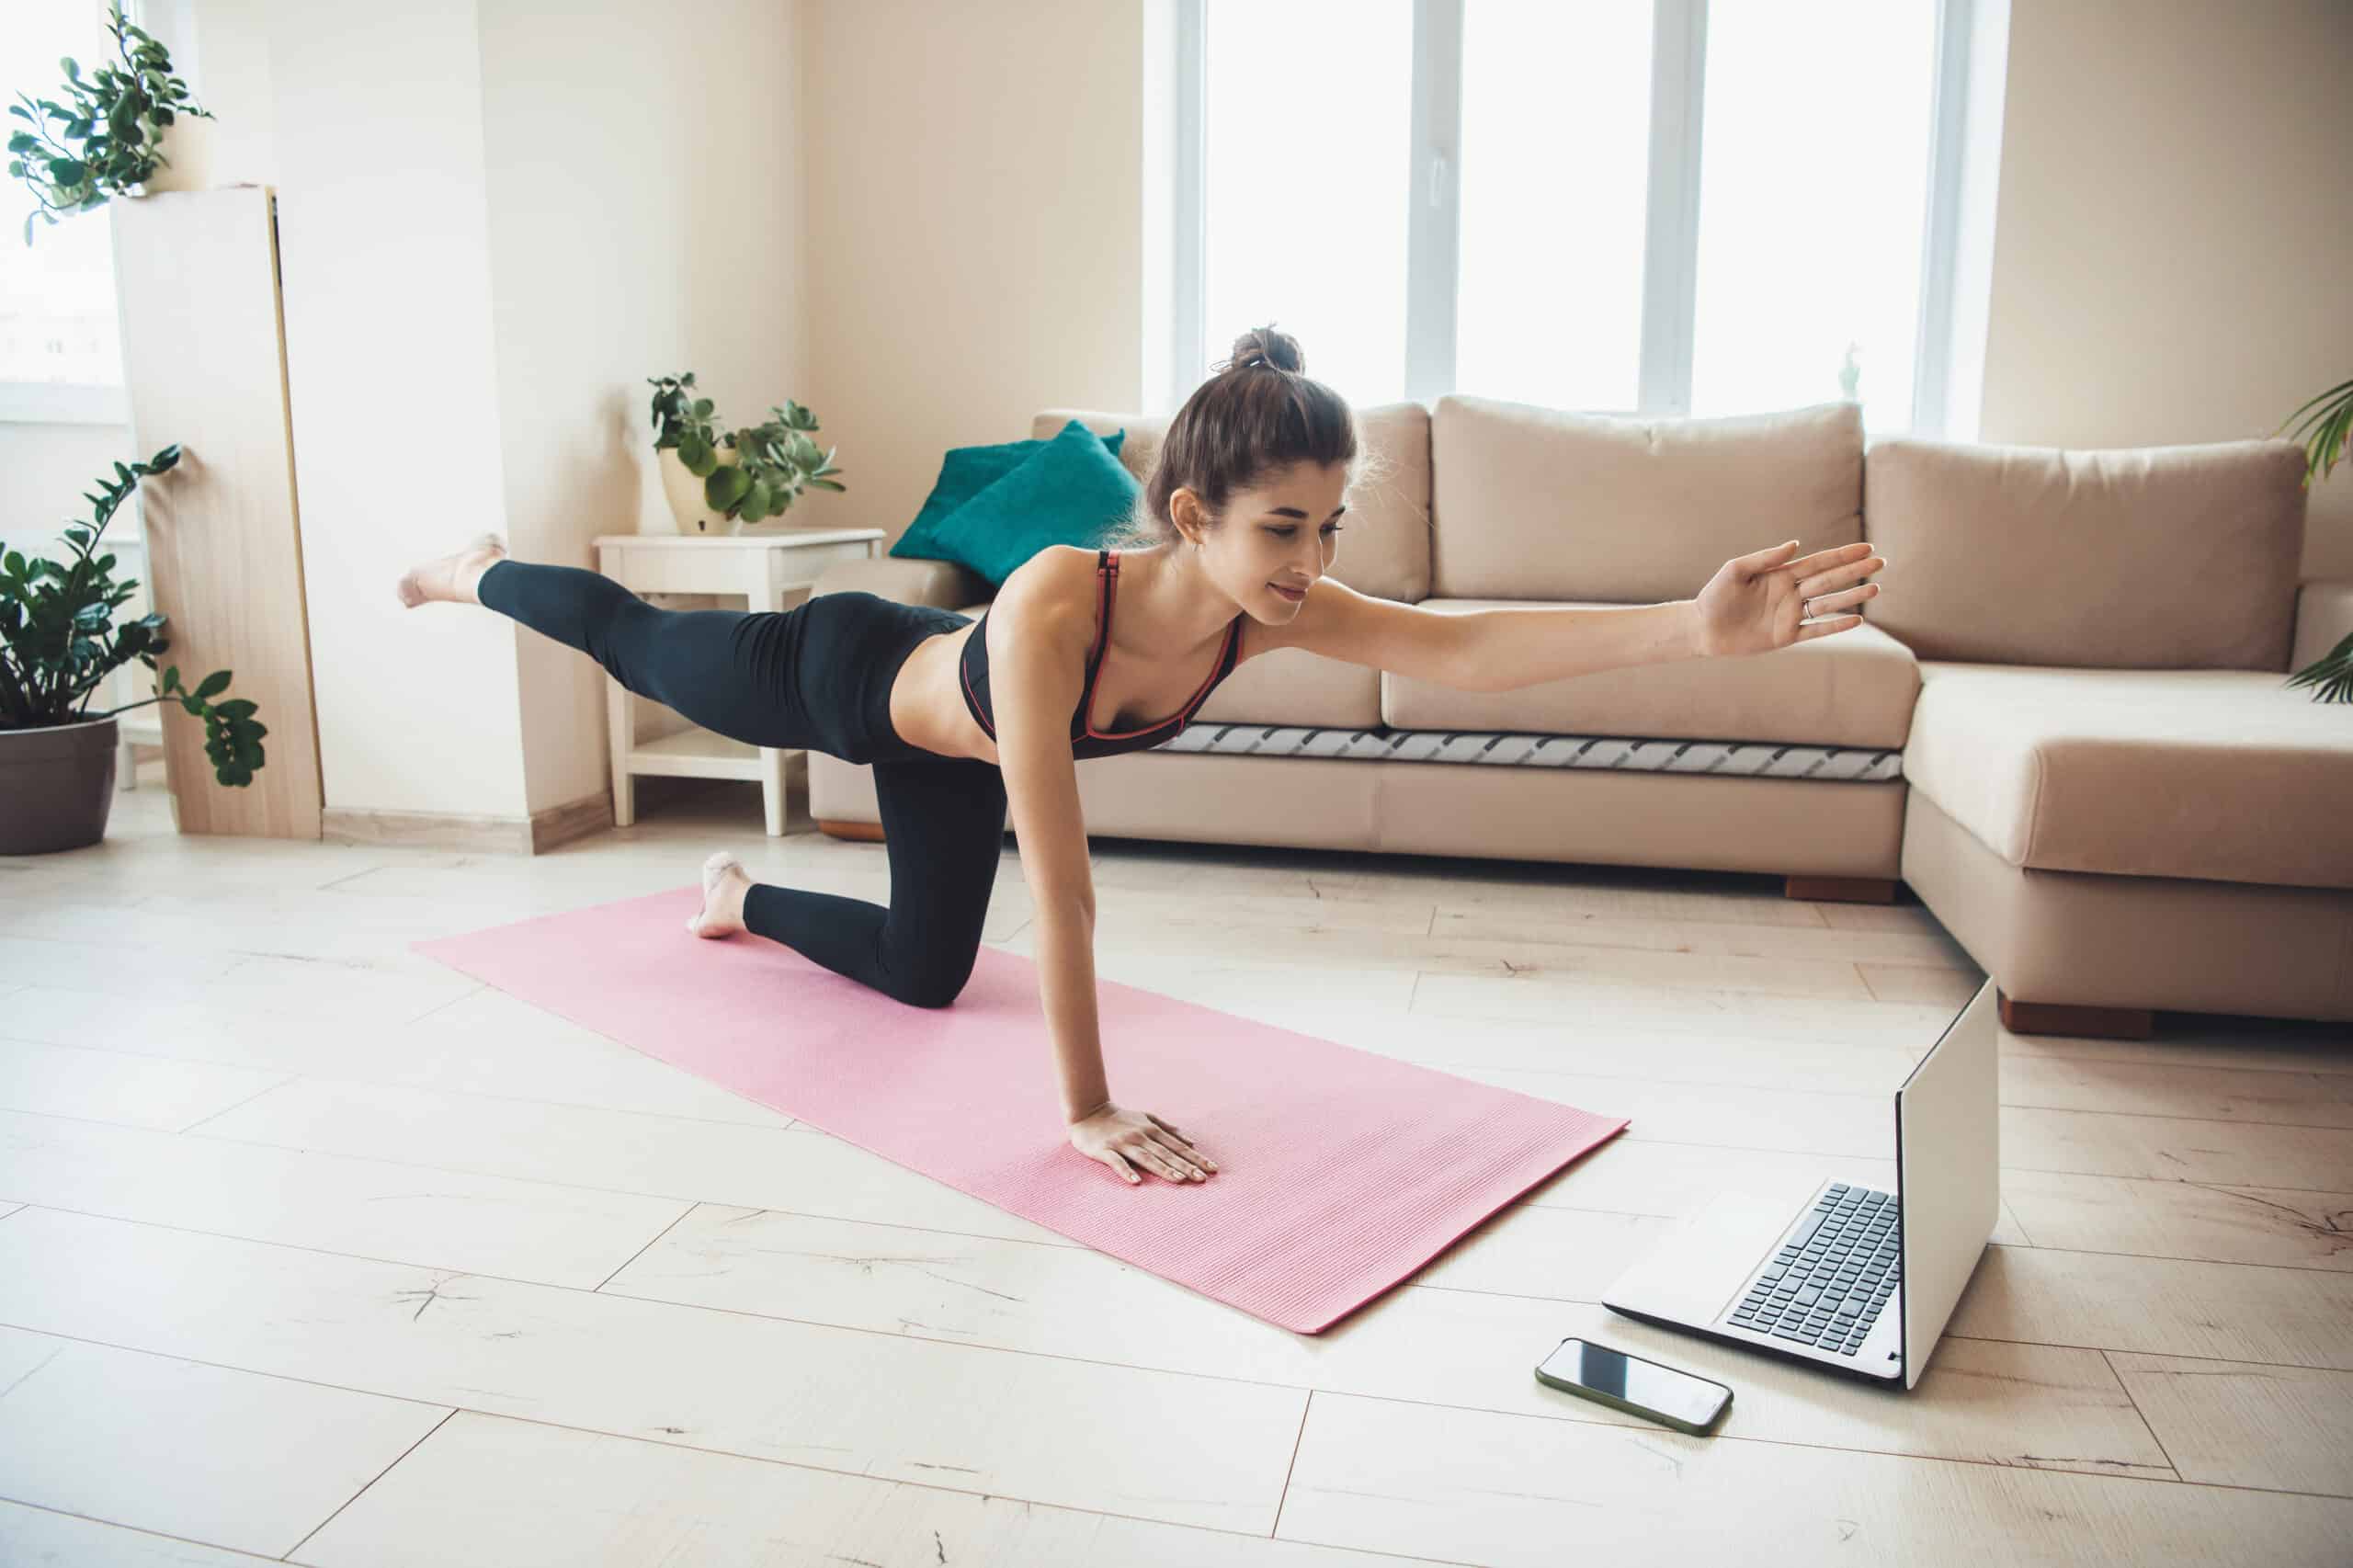 How Live Video-Based Exercise Classes are Transforming Fitness